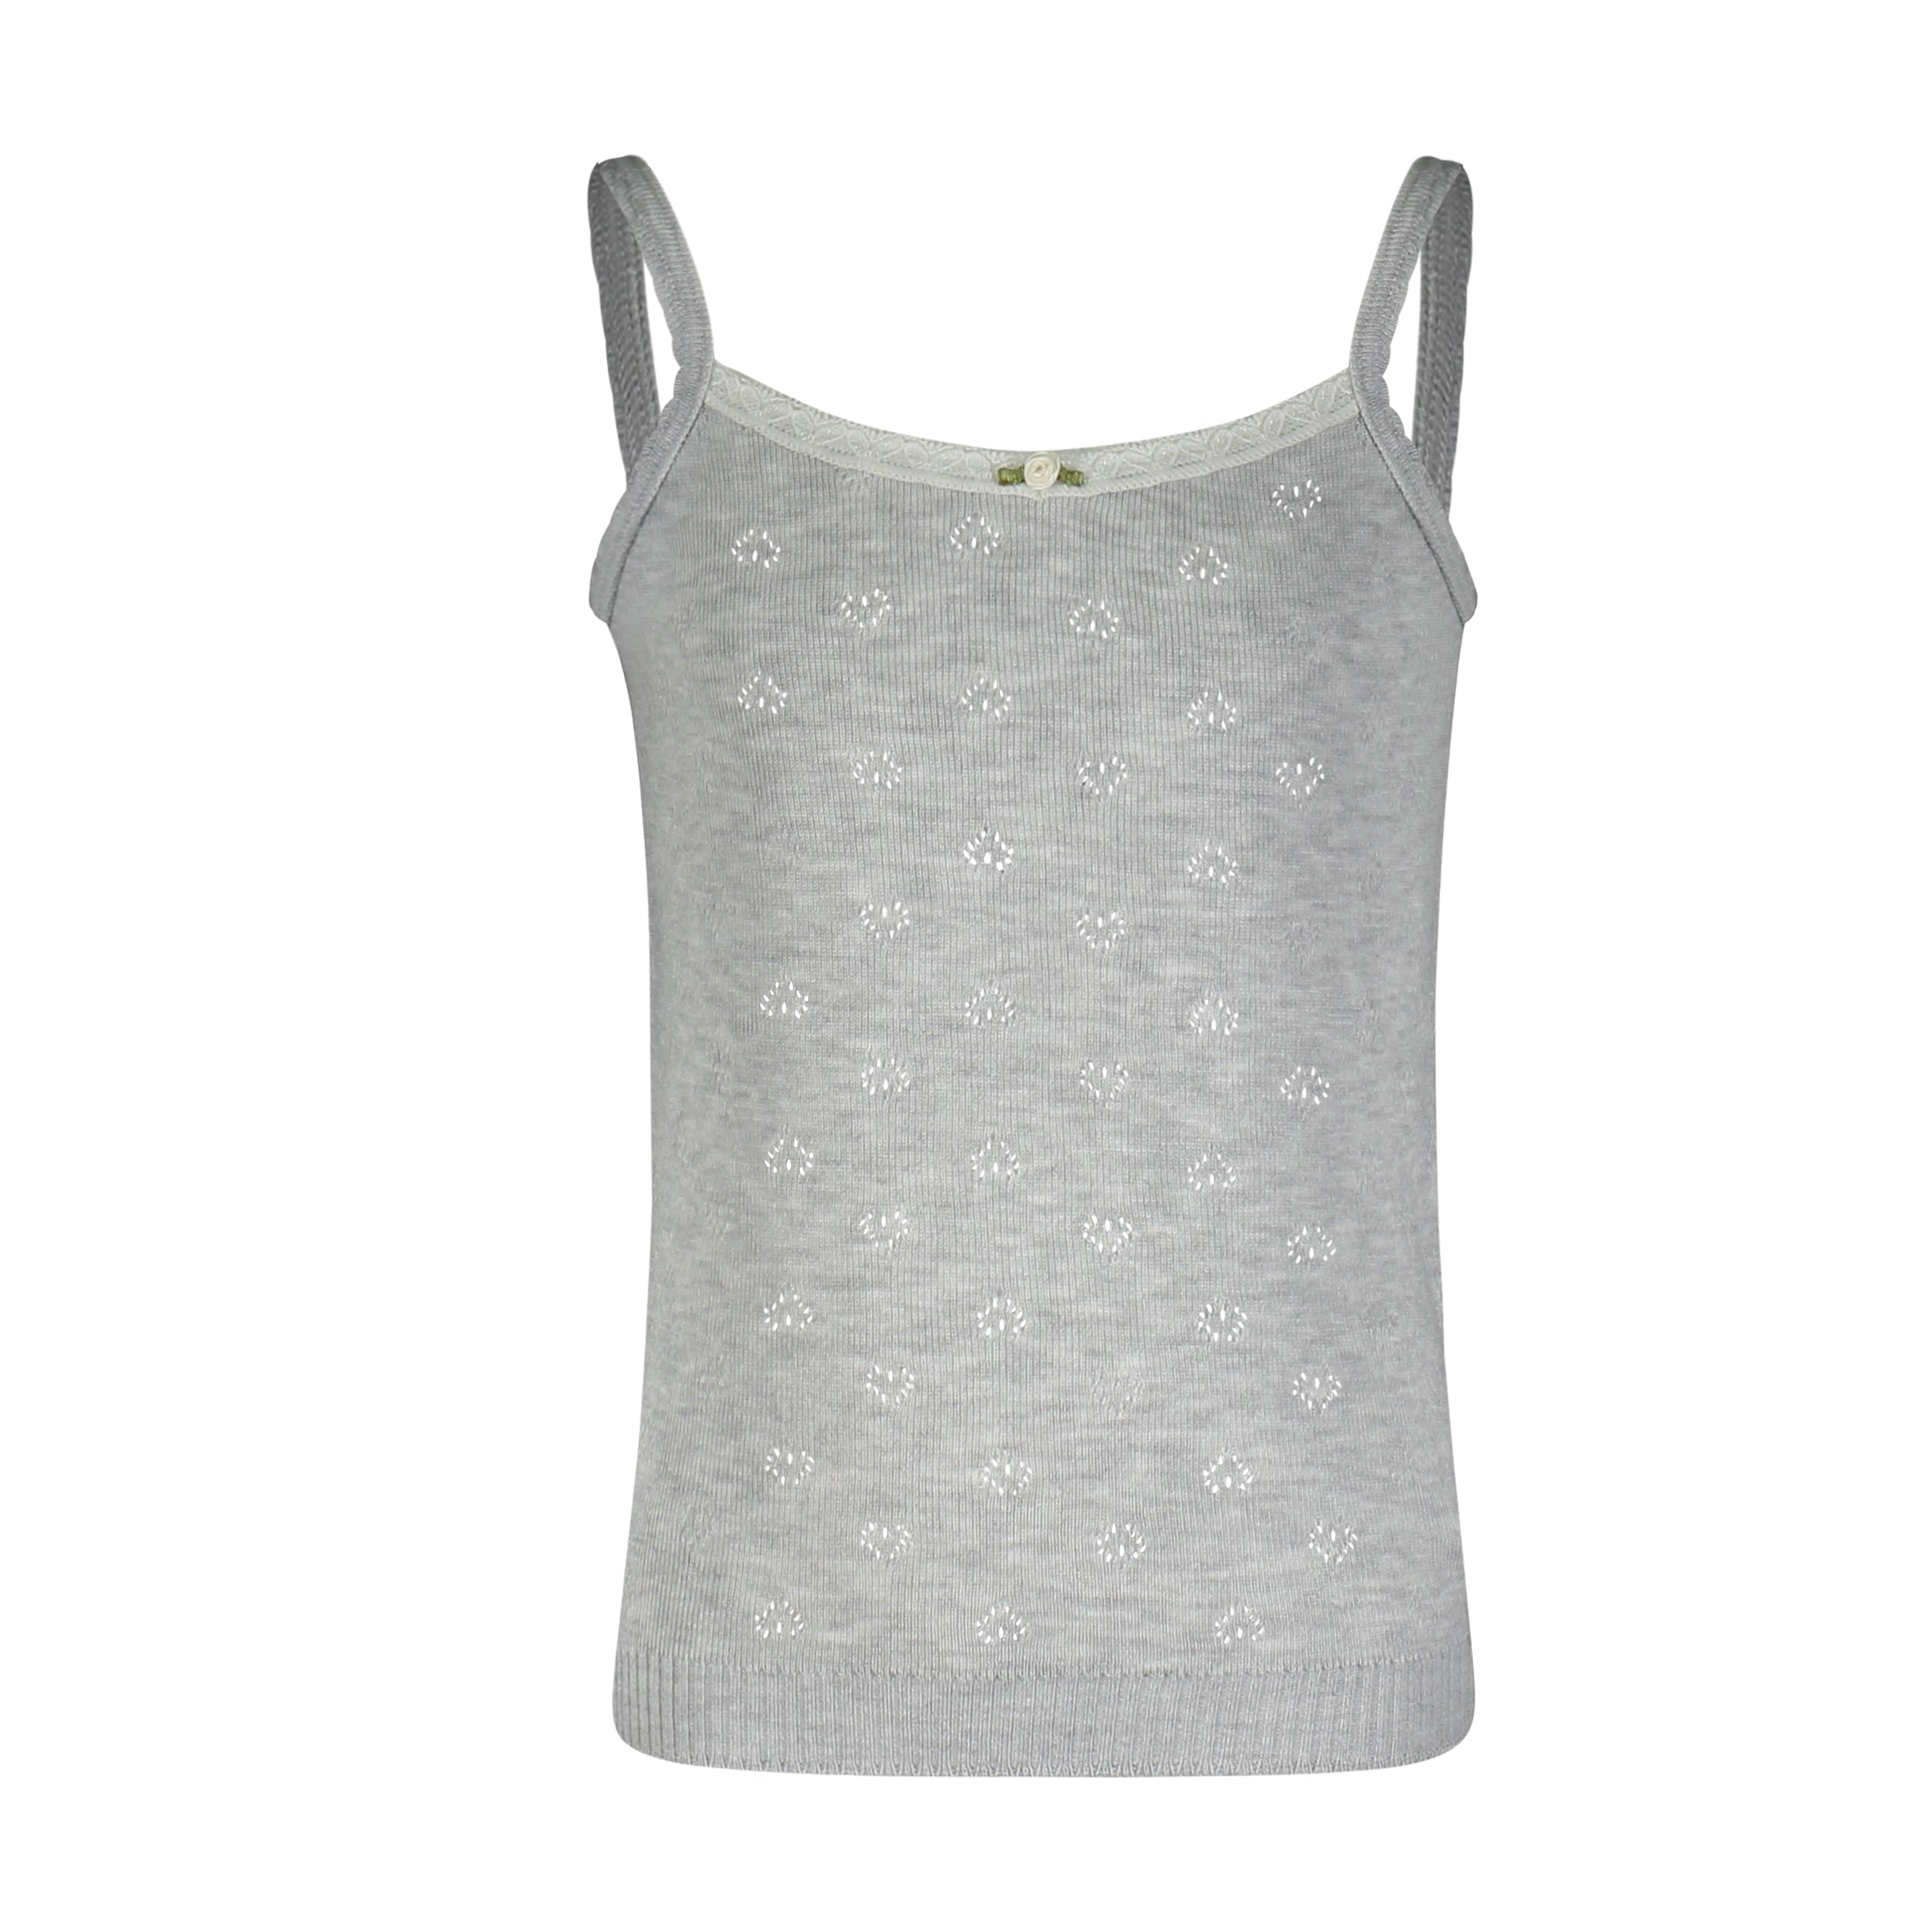 GIRLS CAMISOLE Heather Grey Hearts w Lace